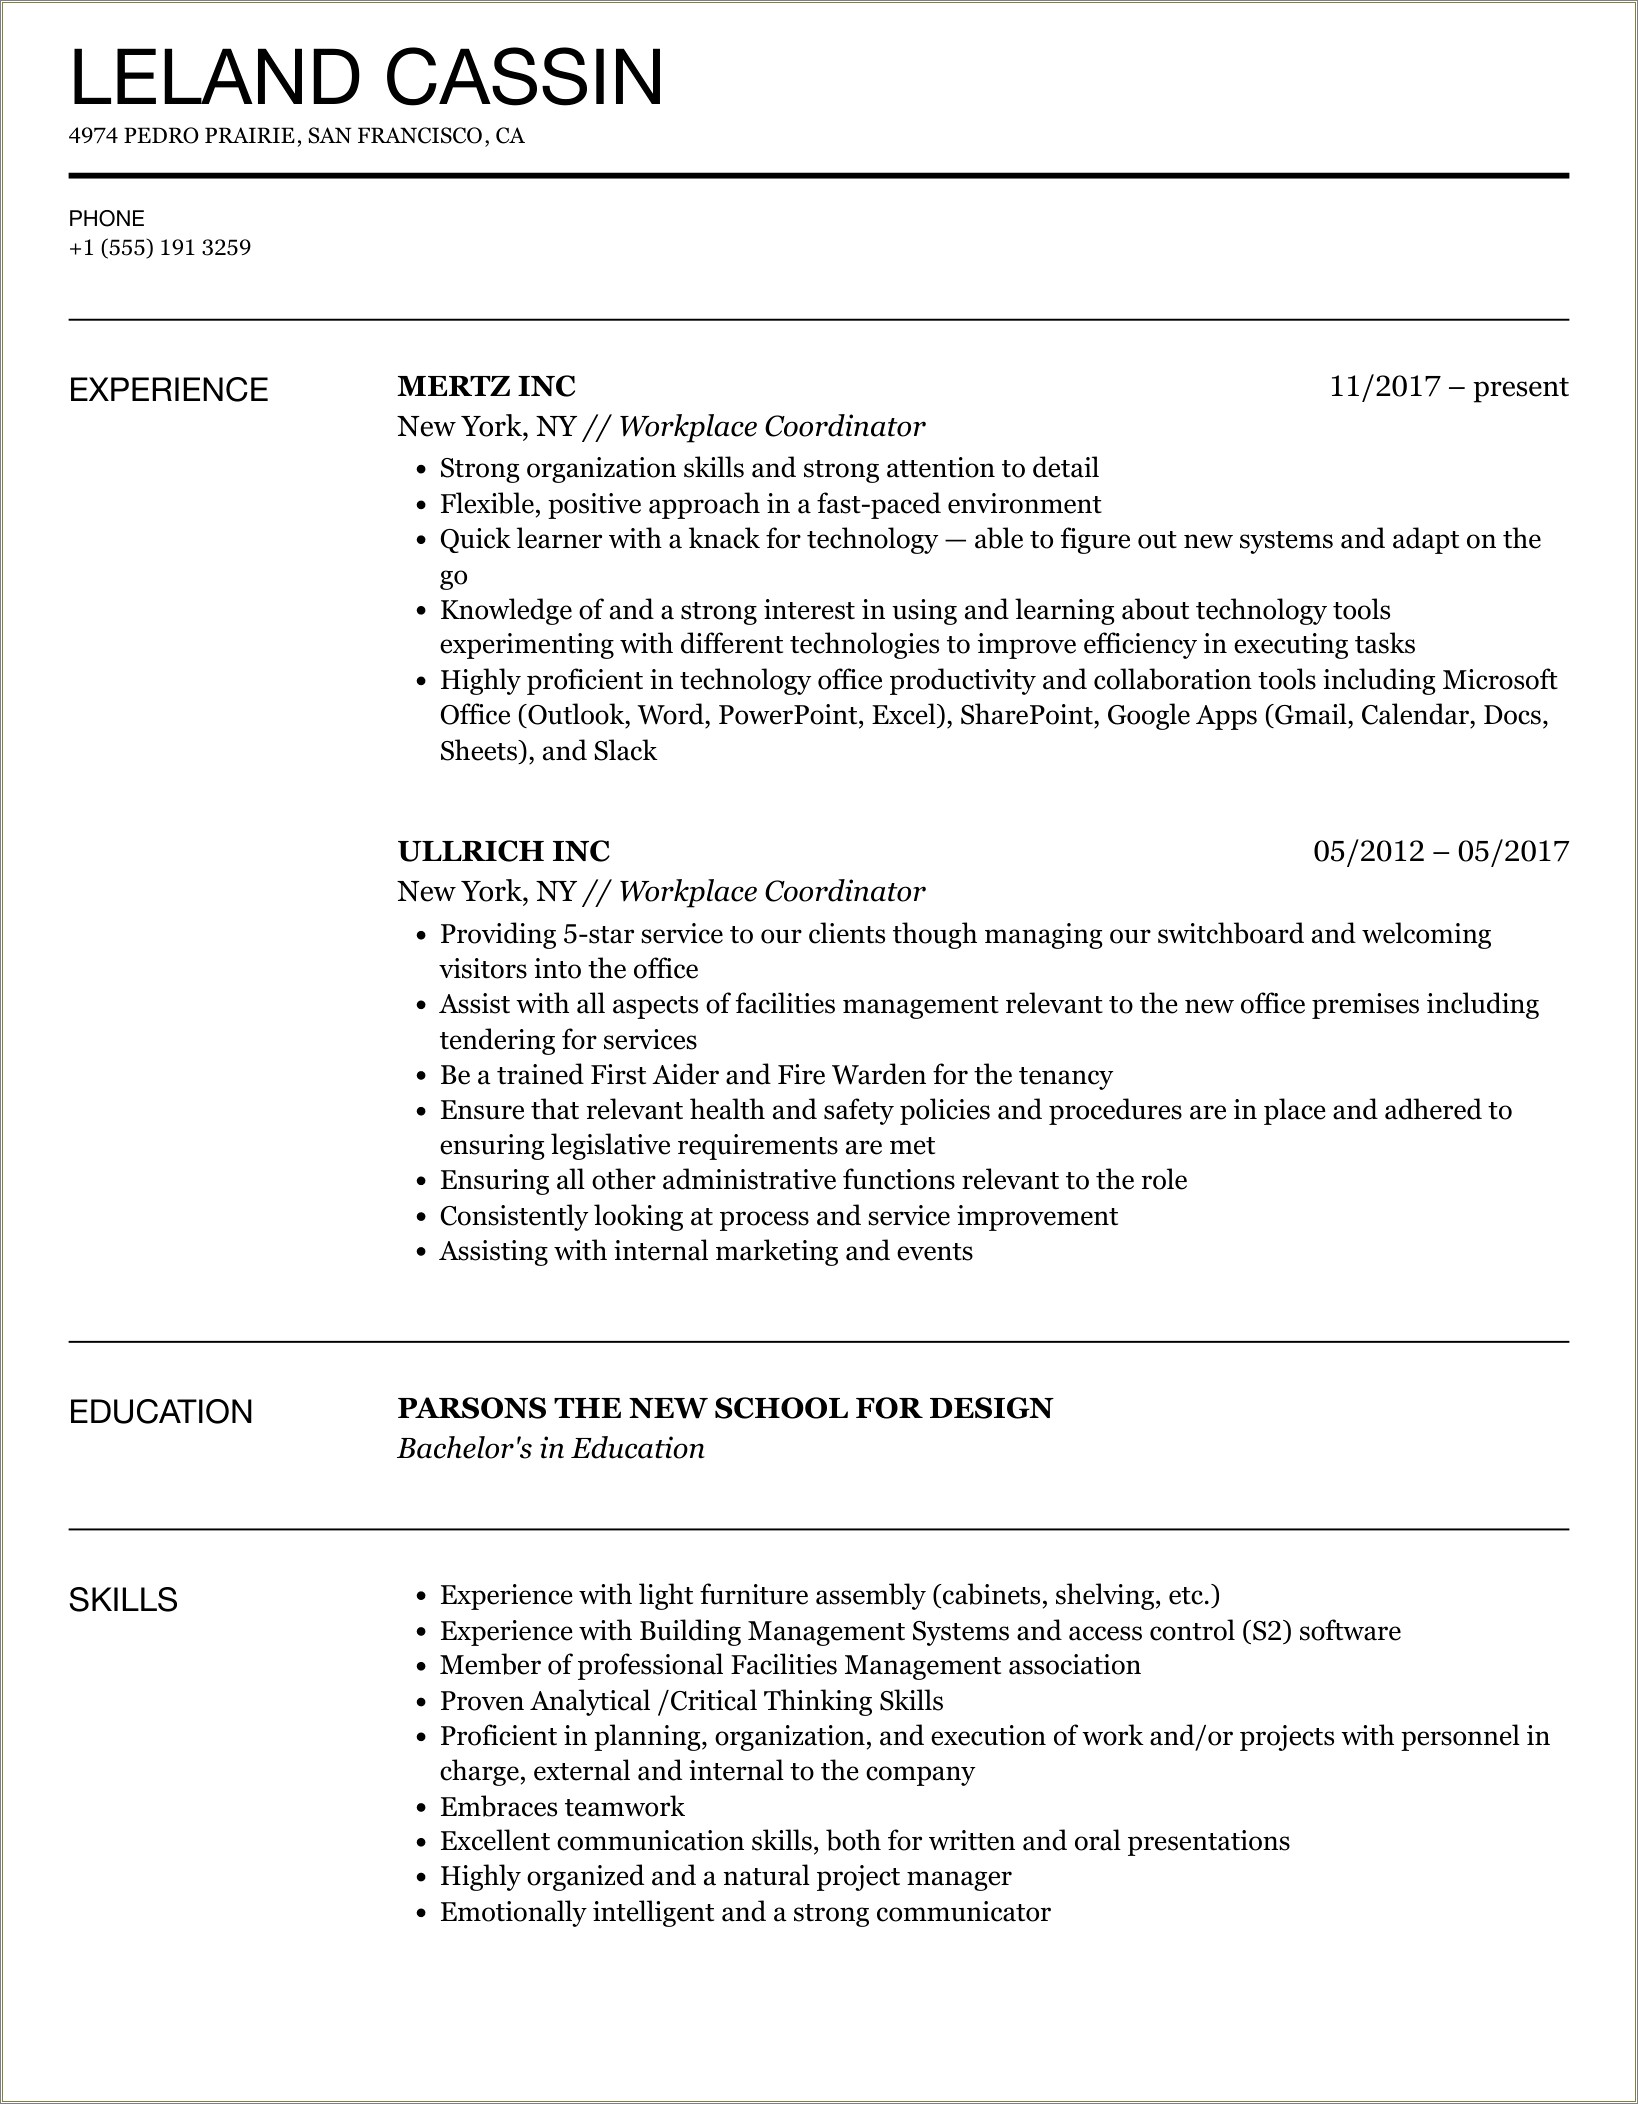 Resume Object For Workplace Experience Coordinator